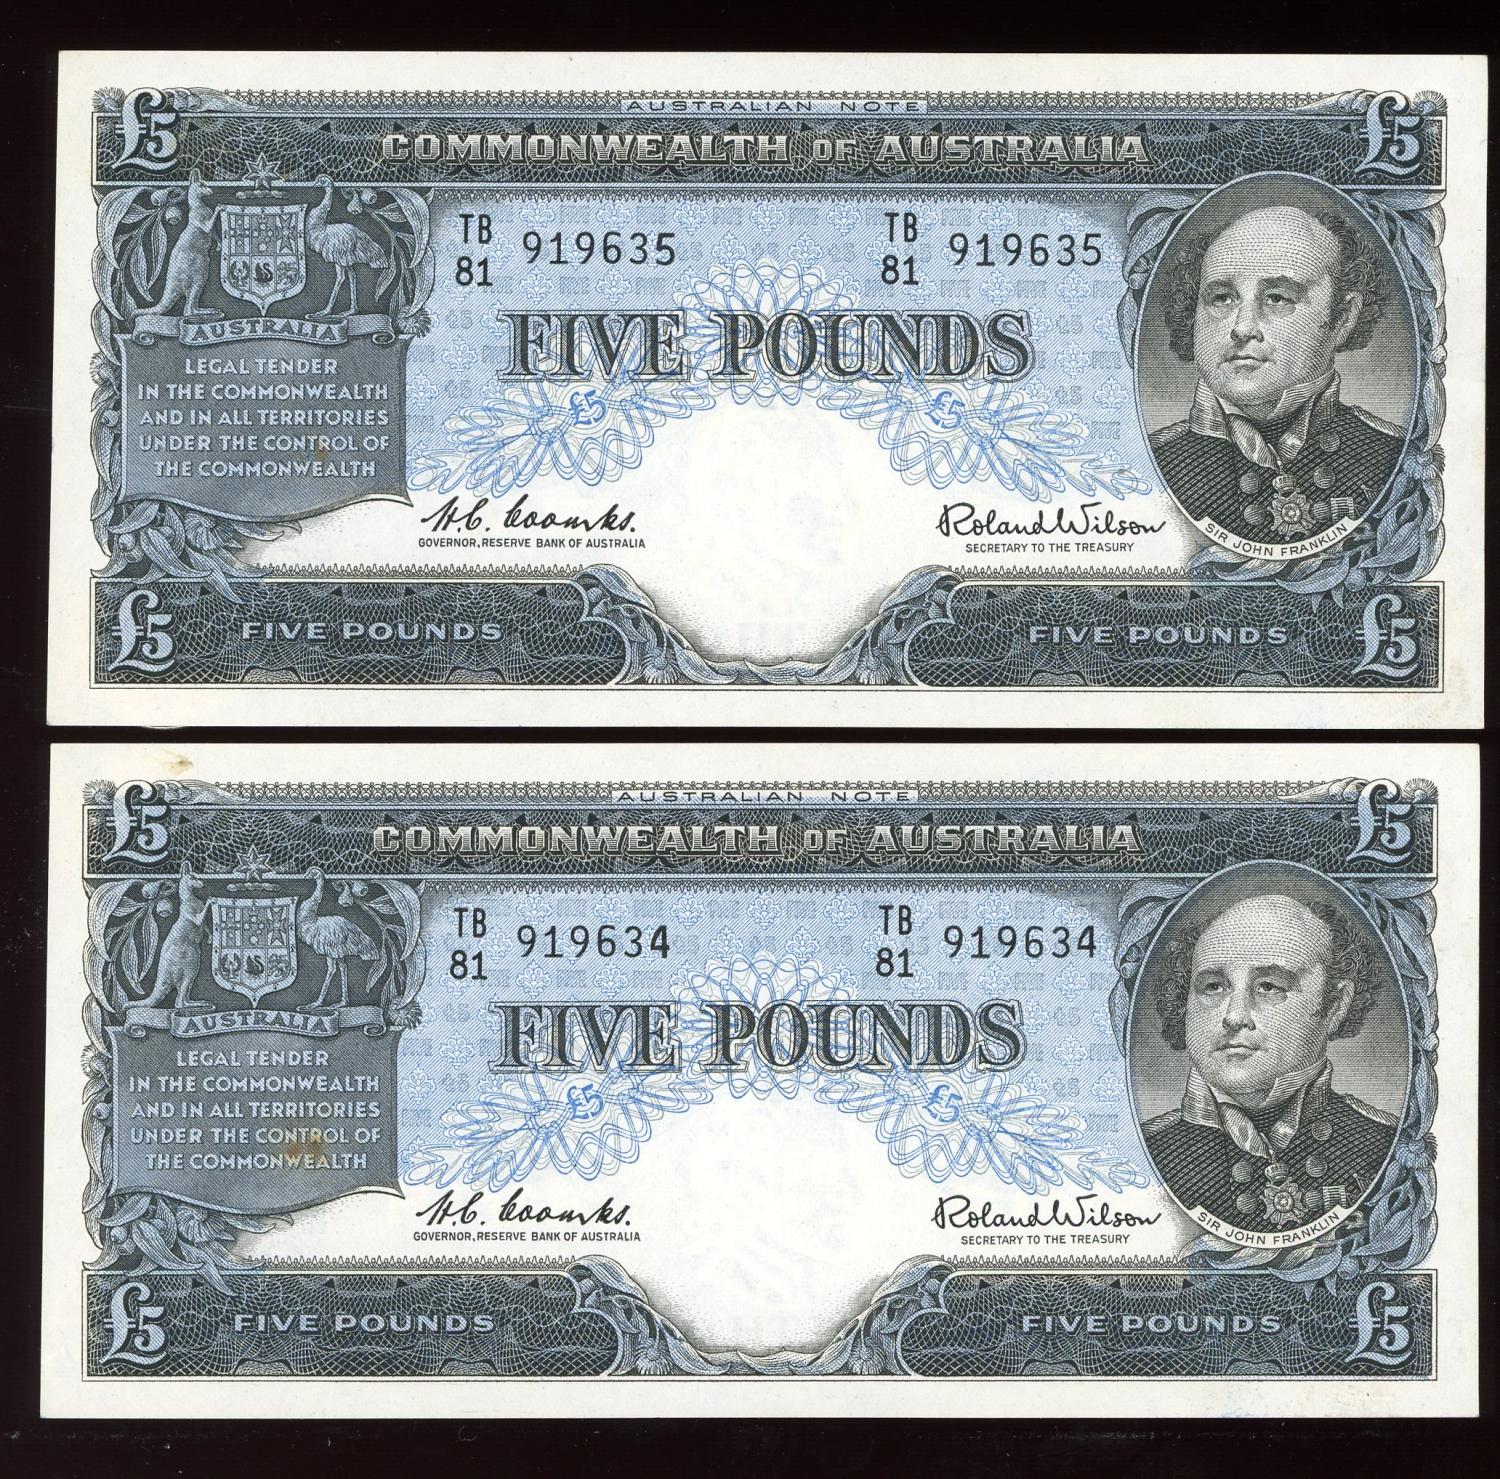 Thumbnail for 1961 Consecutive Pair Five Pound Banknotes Coombs-Wilson TB81 919634-635 aUNC